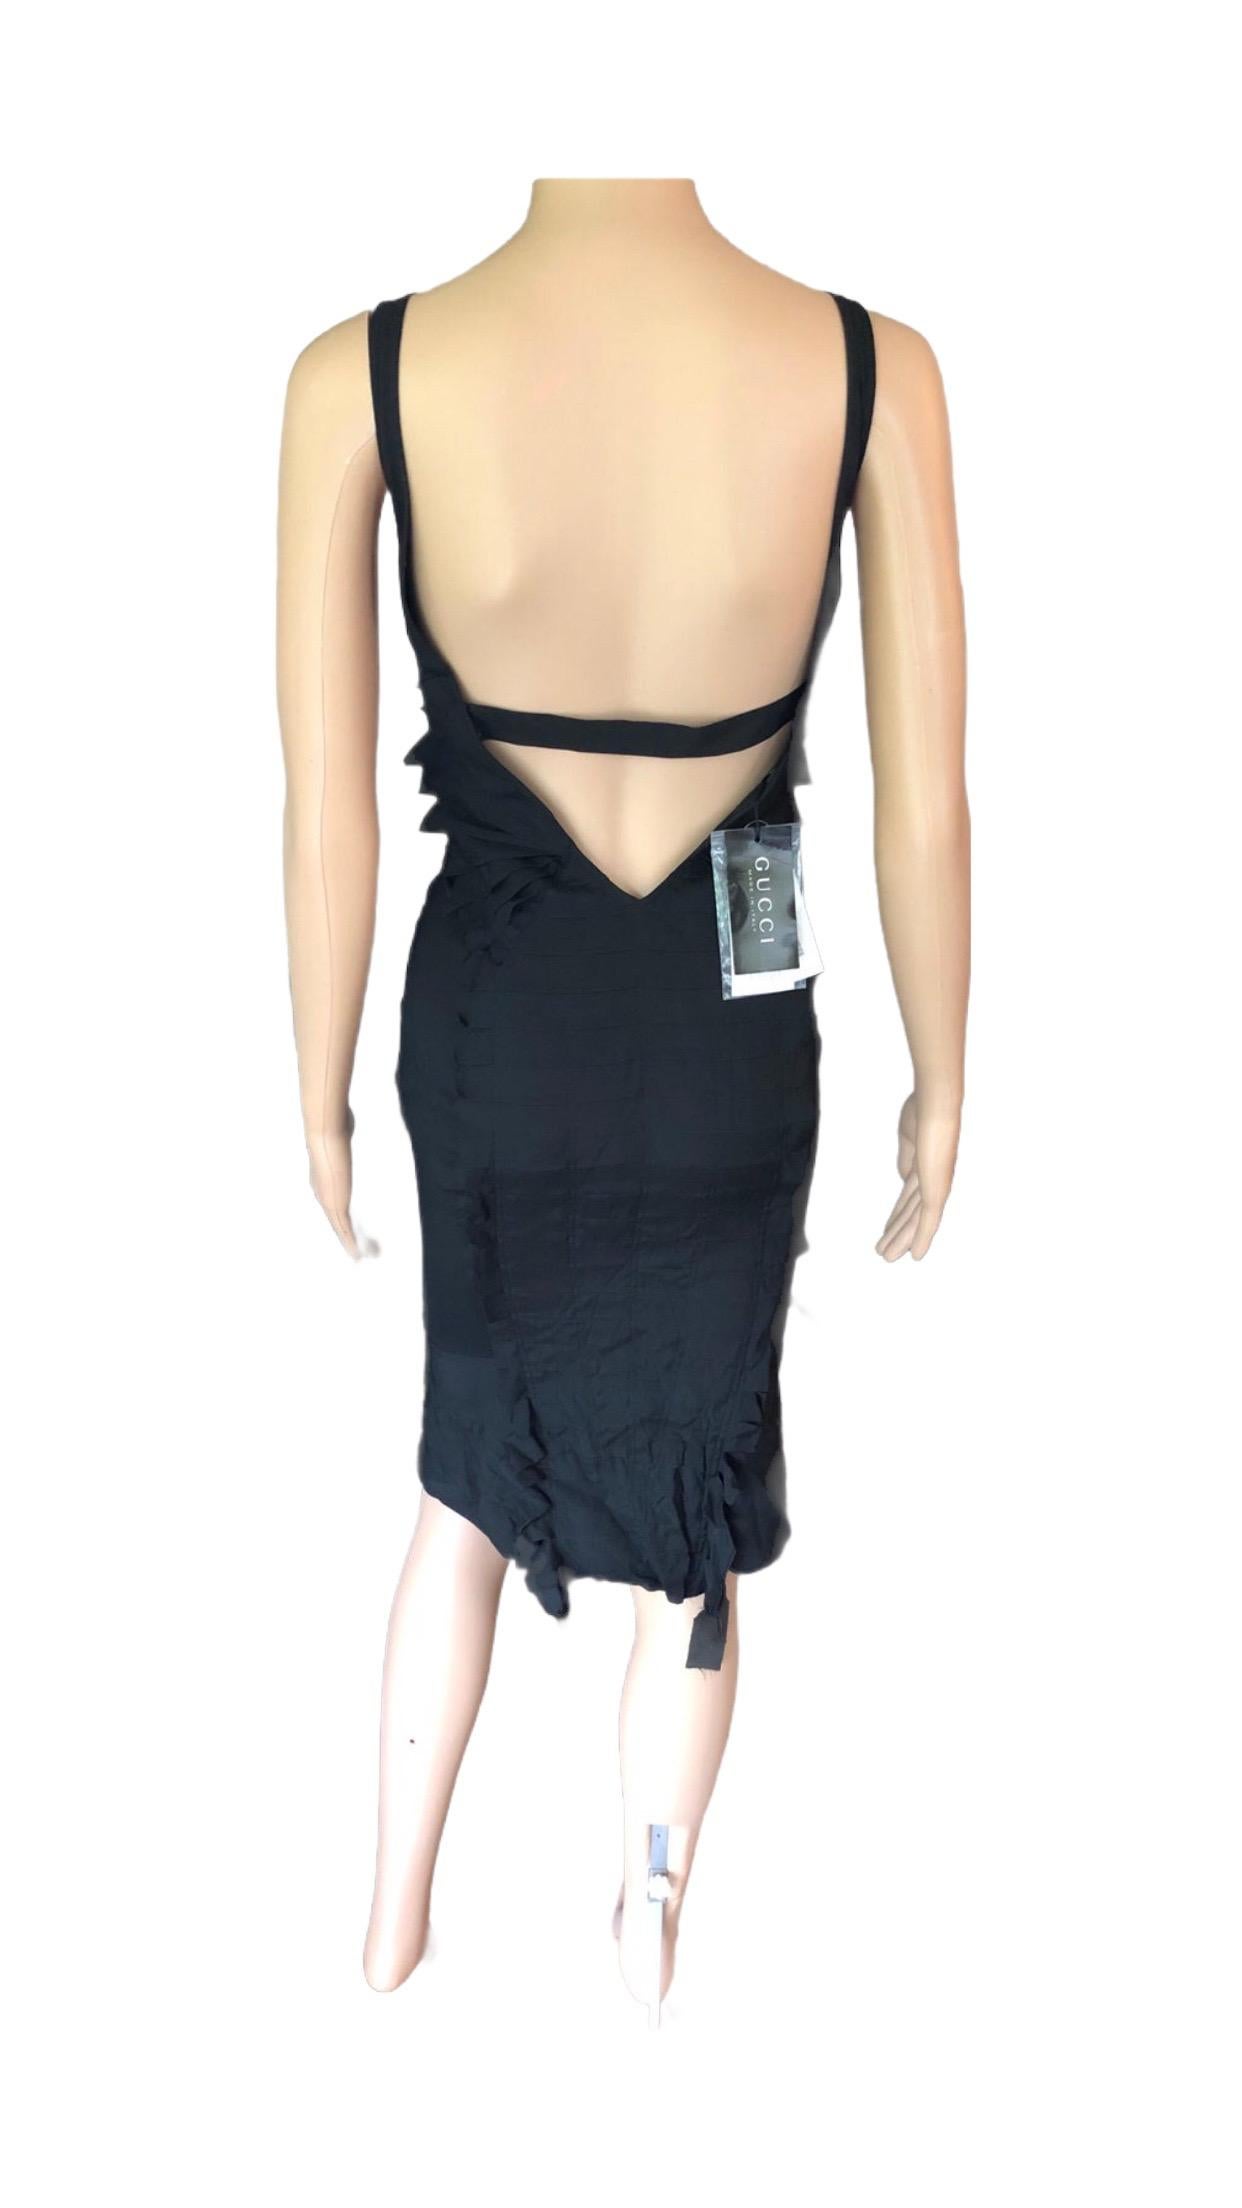 Gucci by Tom Ford S/S 2004 Cutout Black Dress For Sale 4